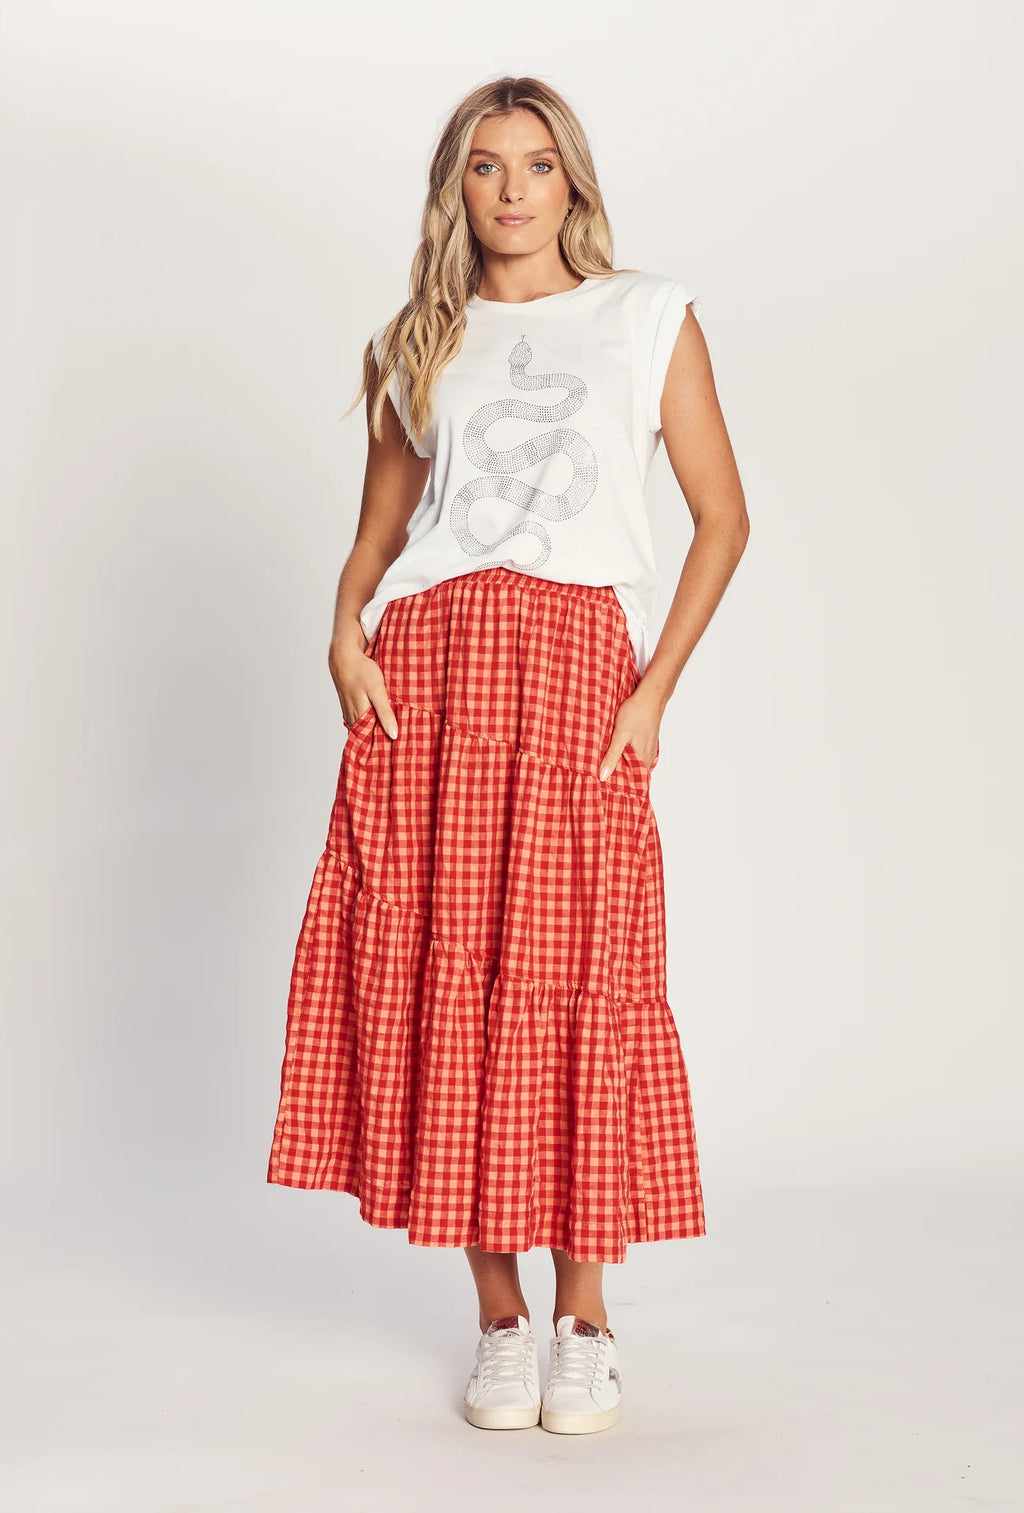 We are the others - The Gingham Skirt